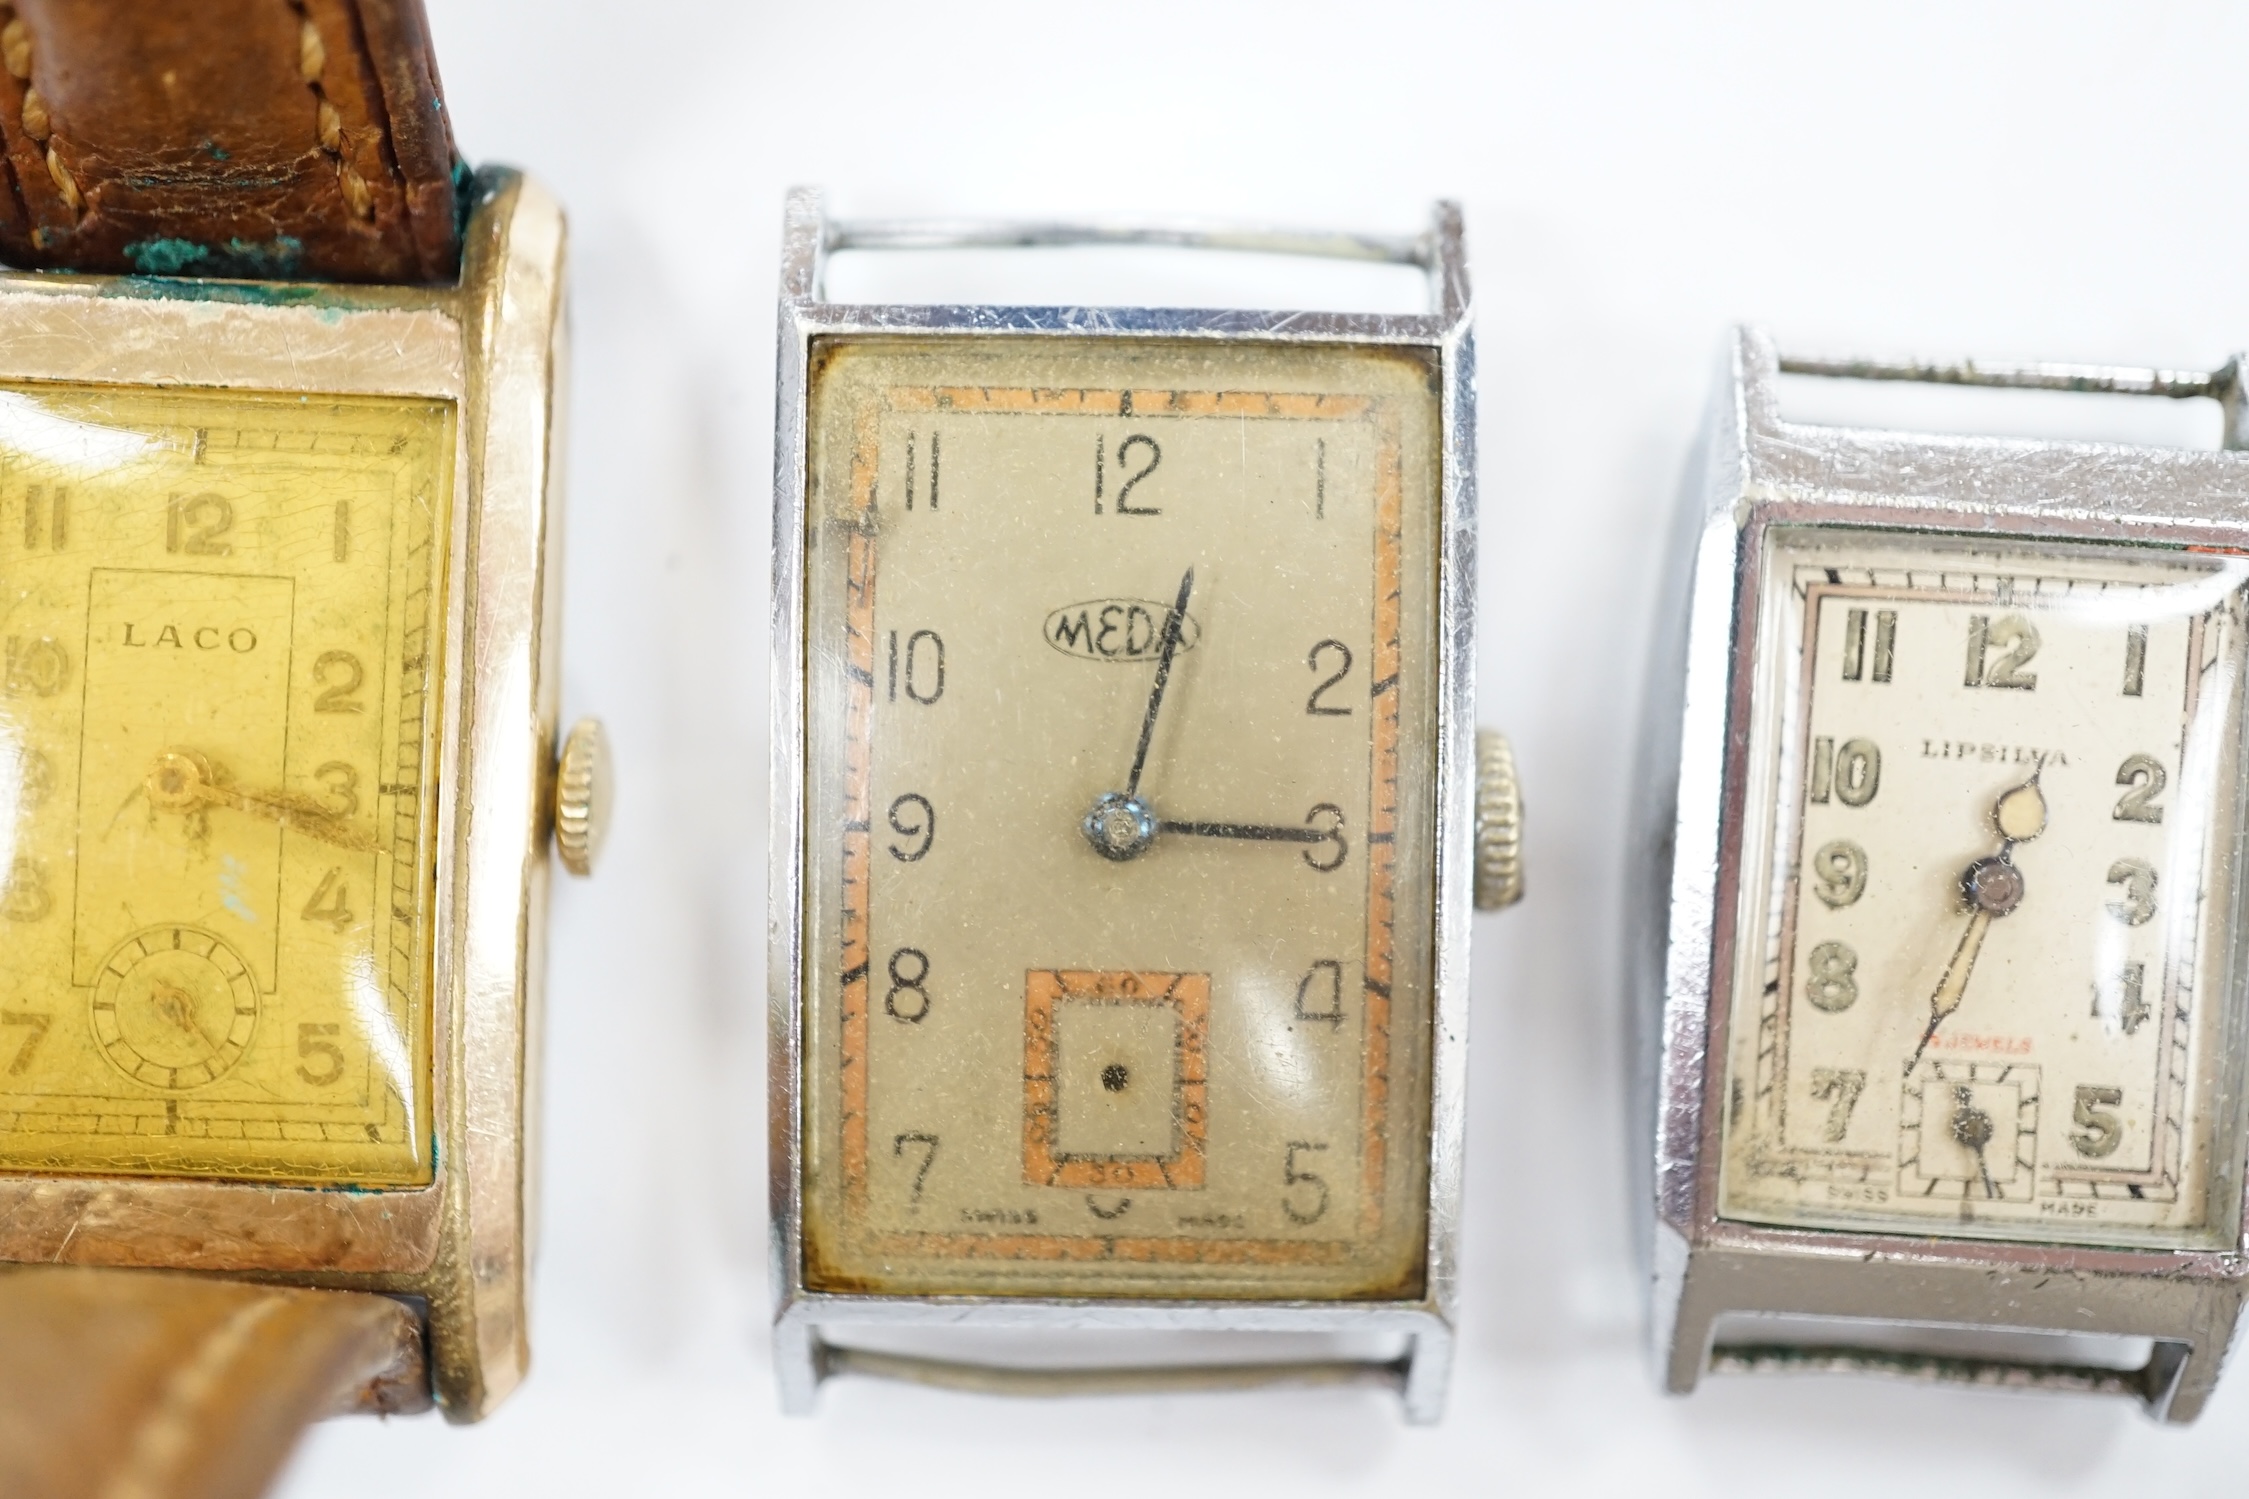 Three assorted gentleman's wrist watches, including Laco, Lipsila and Meda. Condition - poor